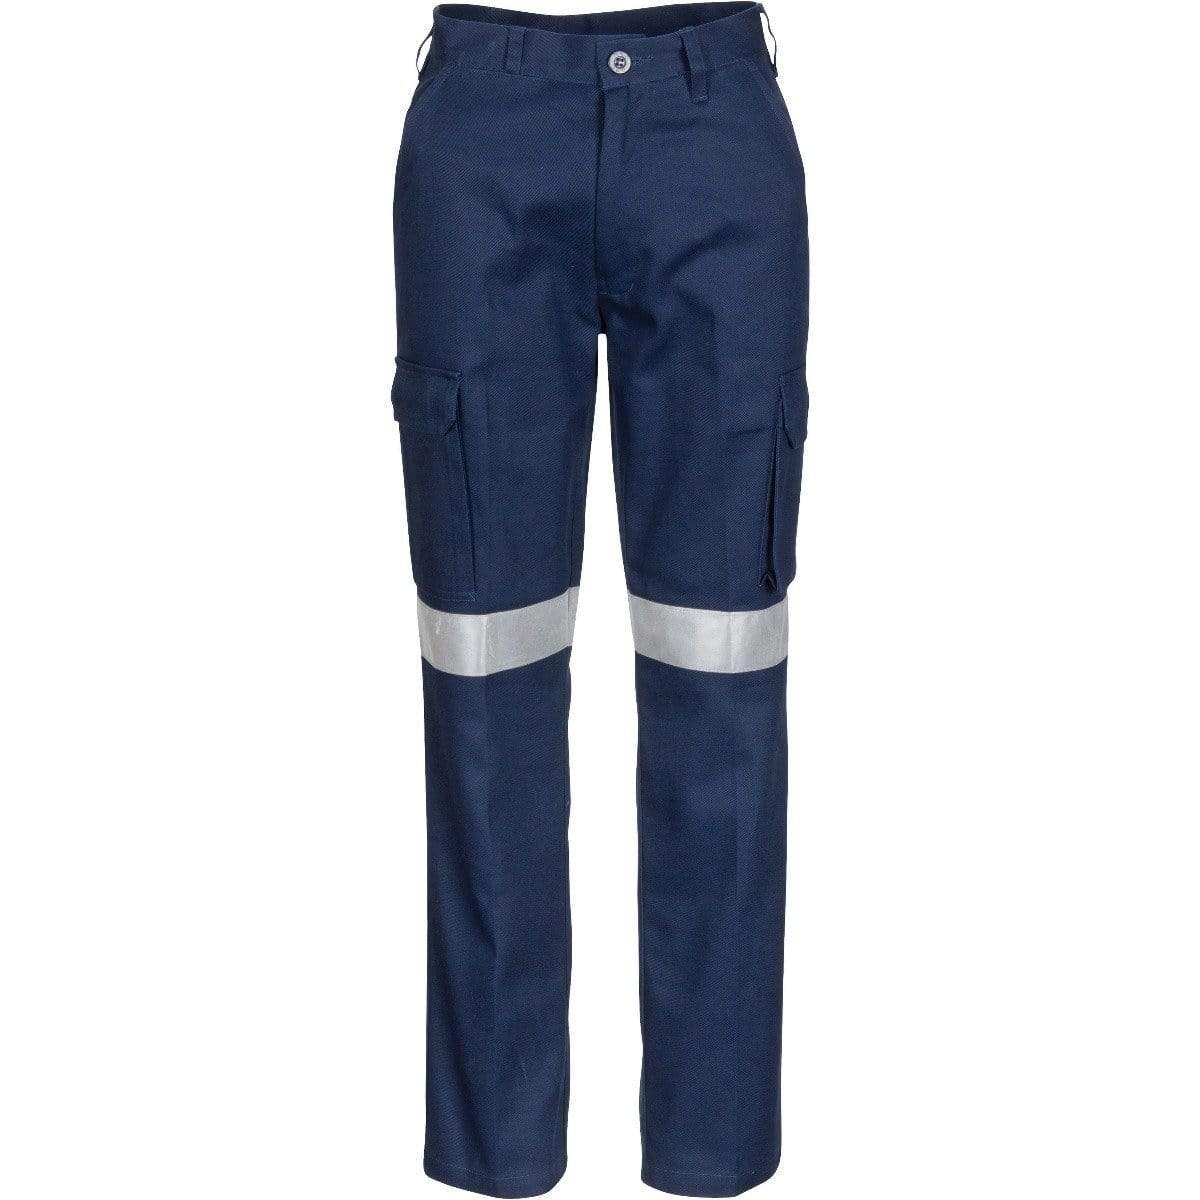 Dnc Workwear Ladies Cotton Drill Cargo Pants With 3m Reflective Tape - 3323 Work Wear DNC Workwear Navy 6 